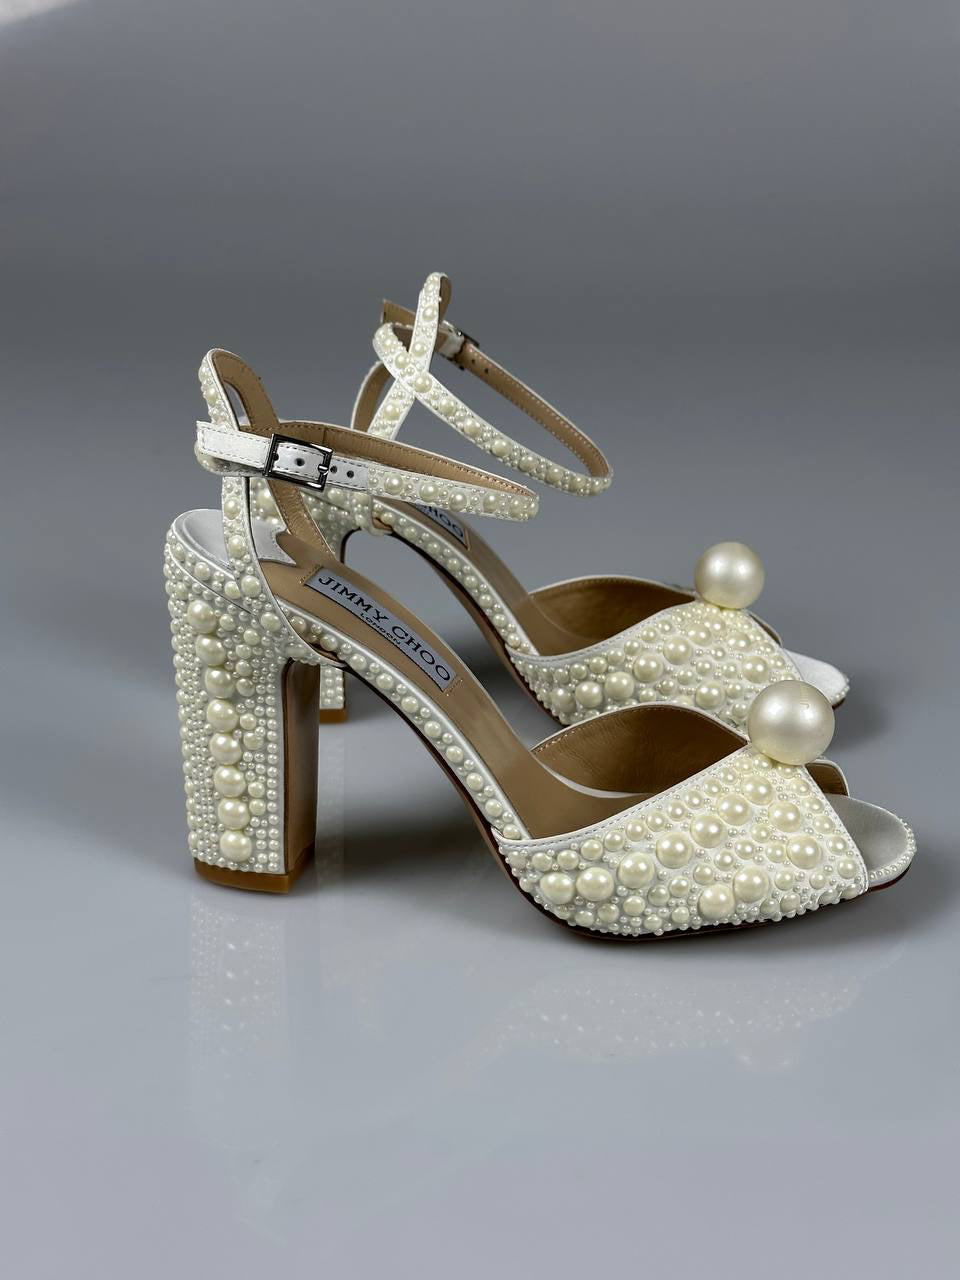 Jimmy Choo Sacaria 100 Satin Sandals with All-Over Pearl Embellishment